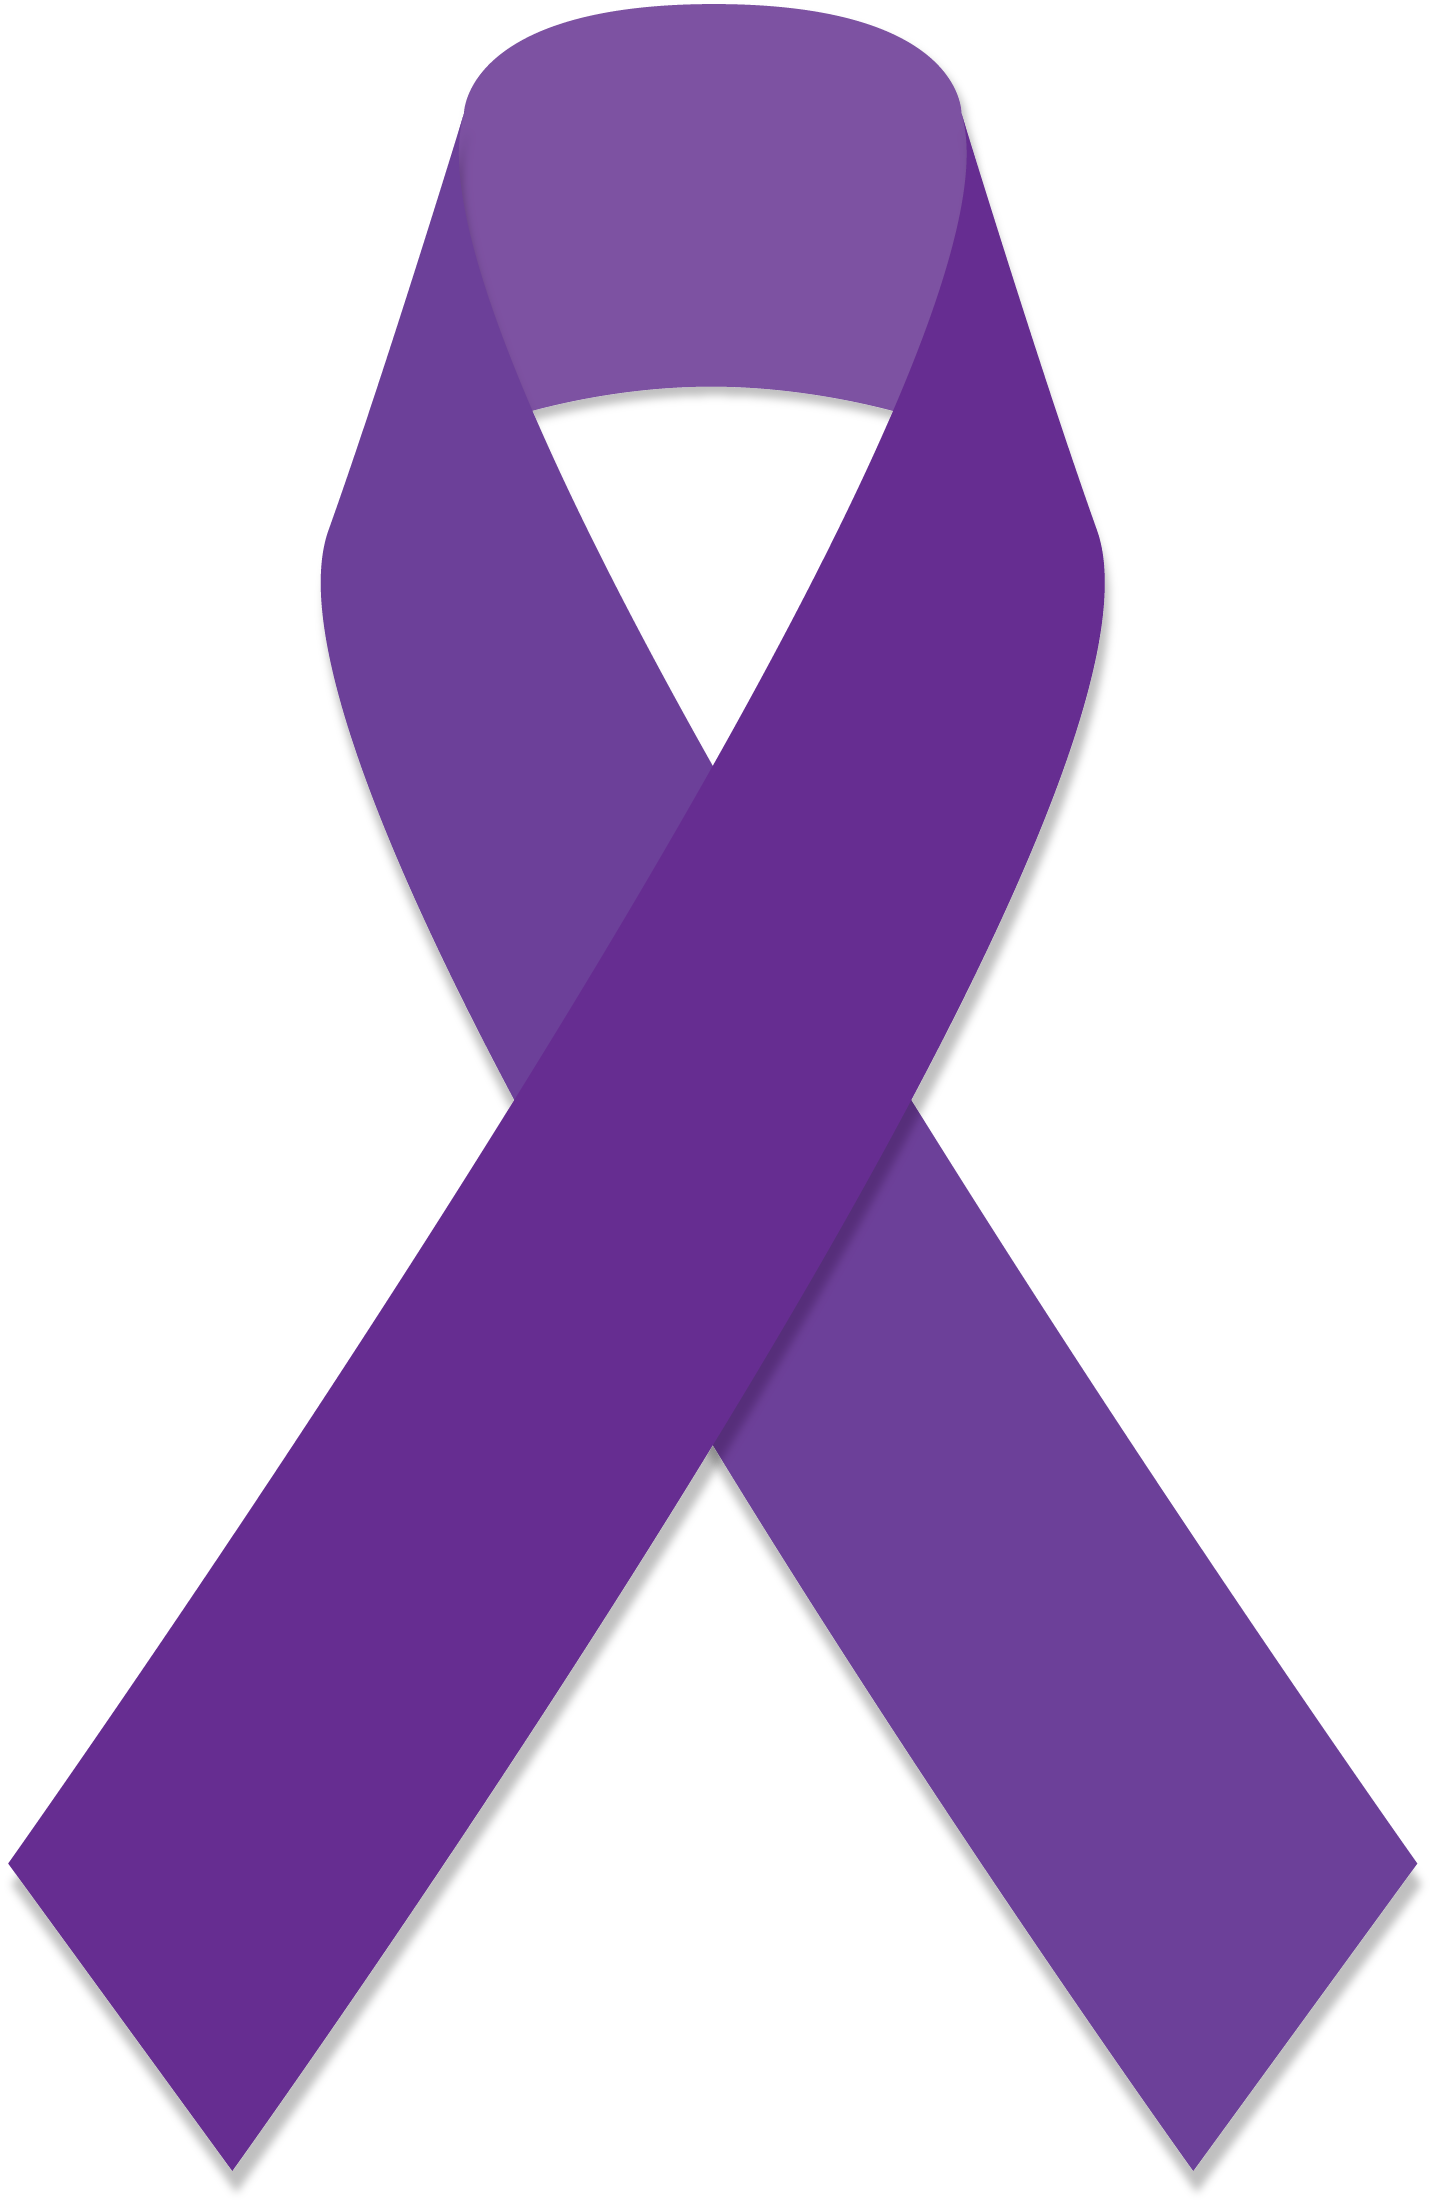 month, which are to mourn the victims of domestic violence, to celebrate those who have survived, and to connect those working to end violence, according to the National Coalition Against Domestic Violence.